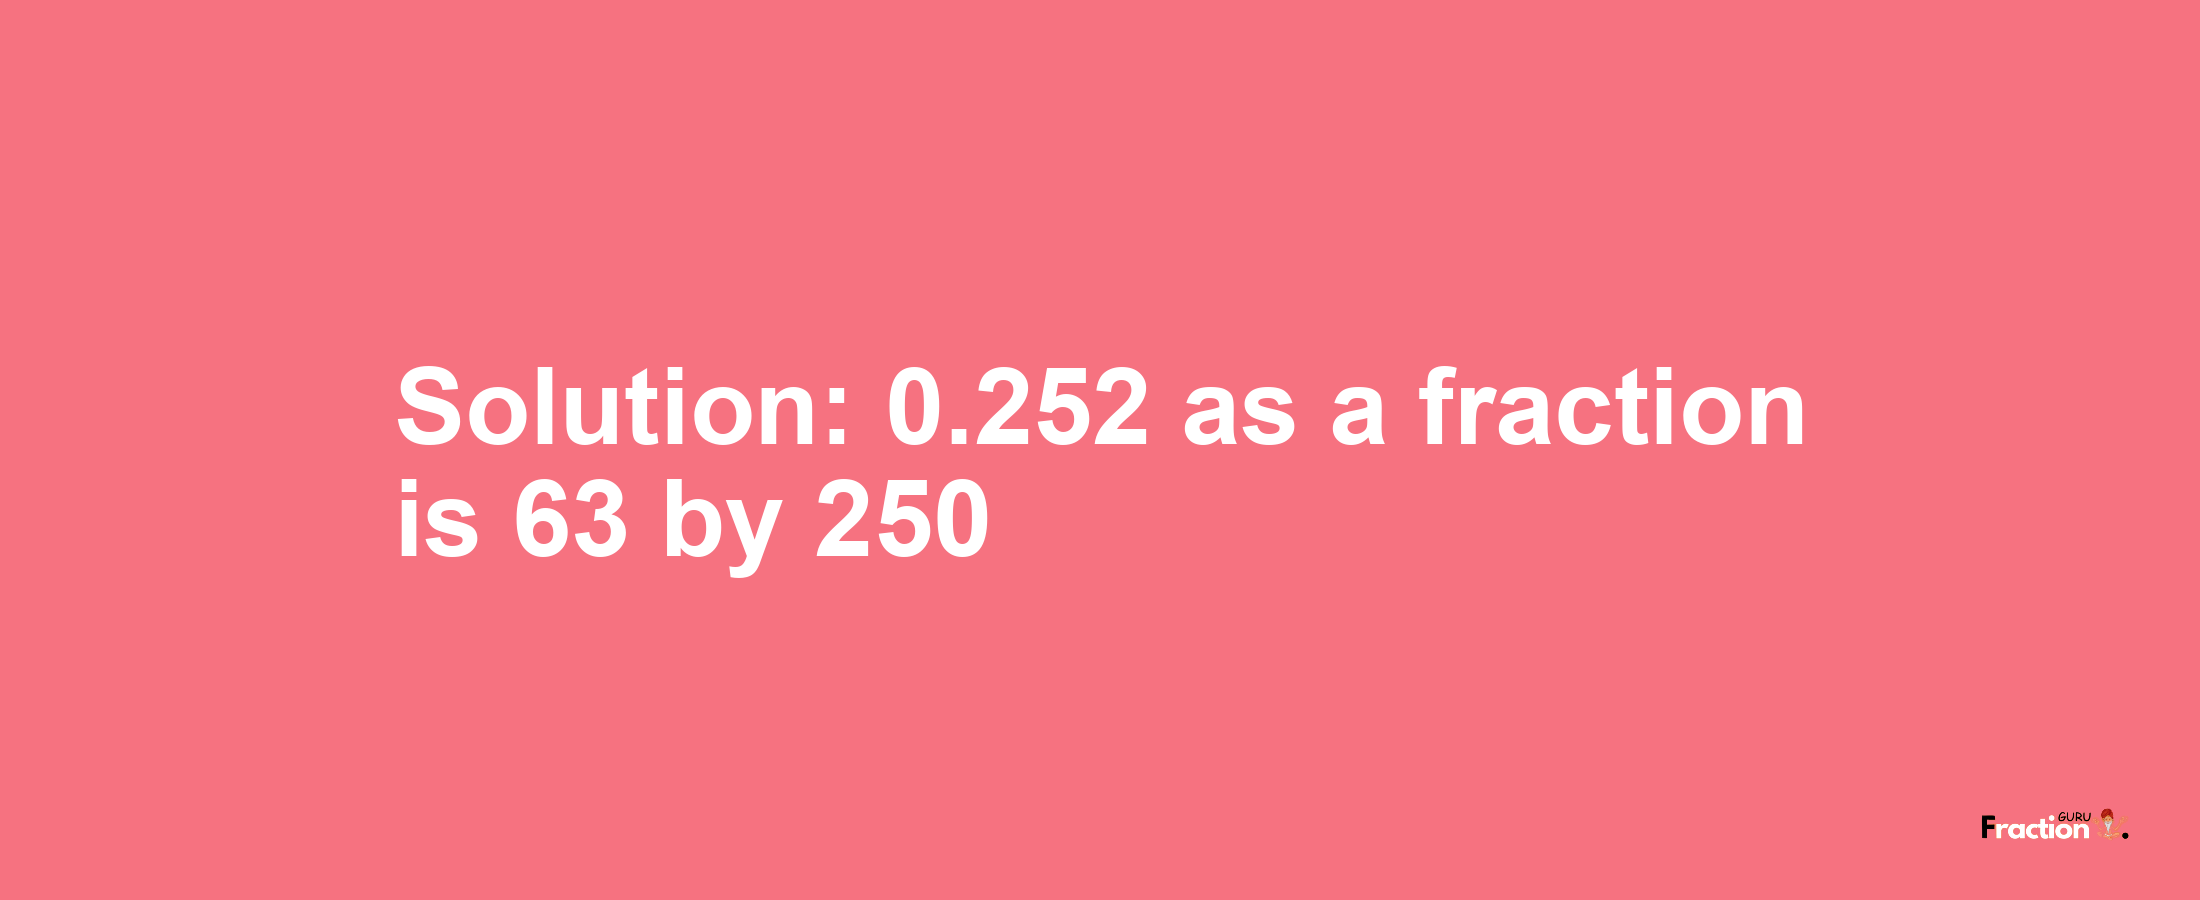 Solution:0.252 as a fraction is 63/250